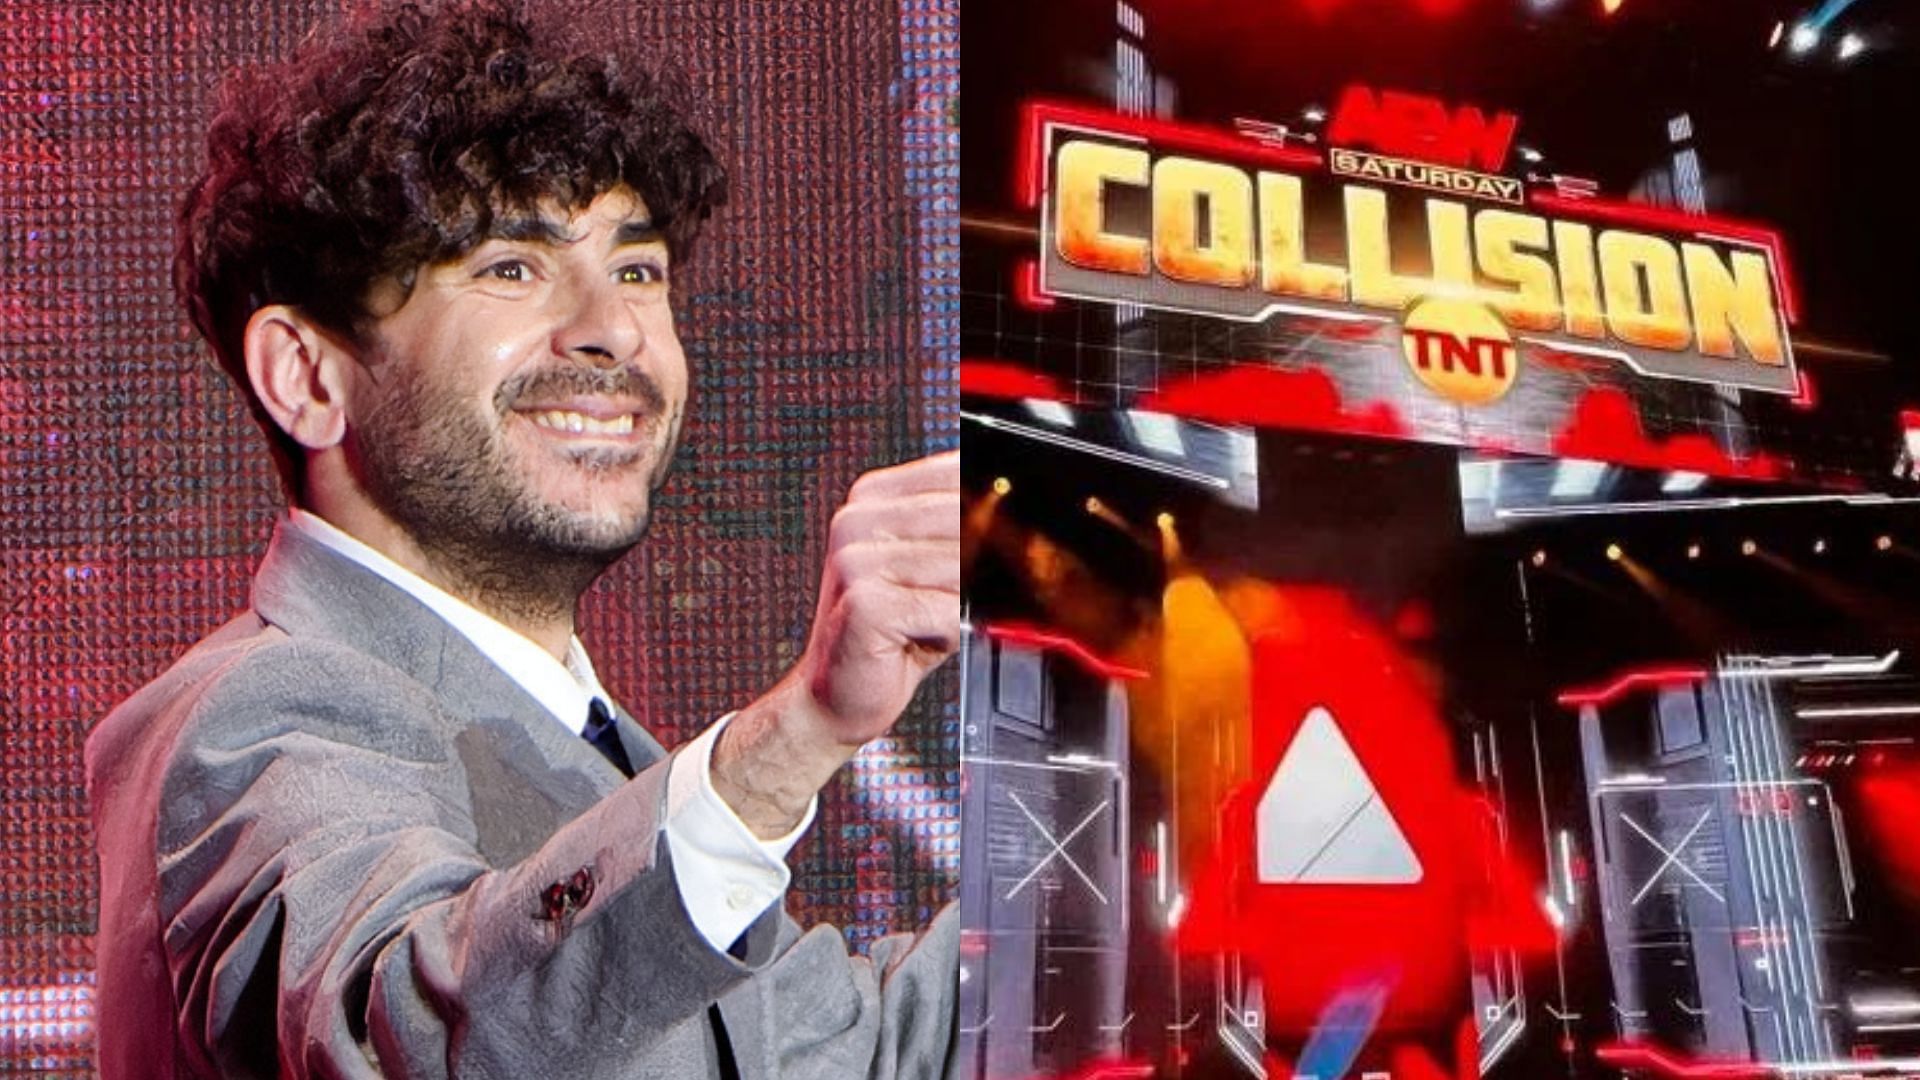 Tony Khan looks set to bring a WWE Hall of Famer back to AEW Collision